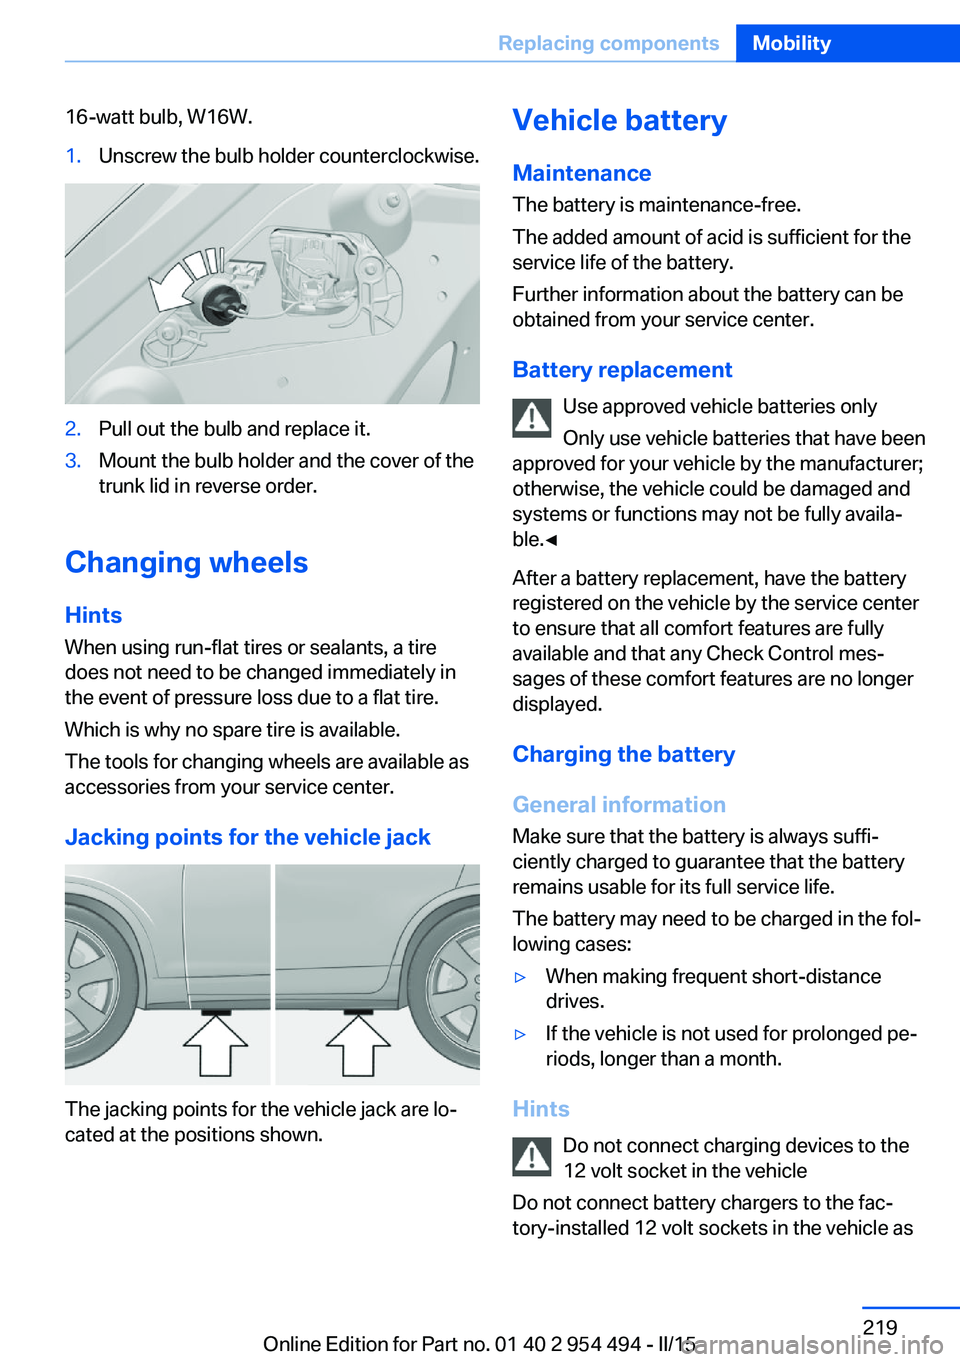 BMW 650I XDRIVE COUPE 2015  Owners Manual 16-watt bulb, W16W.1.Unscrew the bulb holder counterclockwise.2.Pull out the bulb and replace it.3.Mount the bulb holder and the cover of the
trunk lid in reverse order.
Changing wheels
Hints
When usi